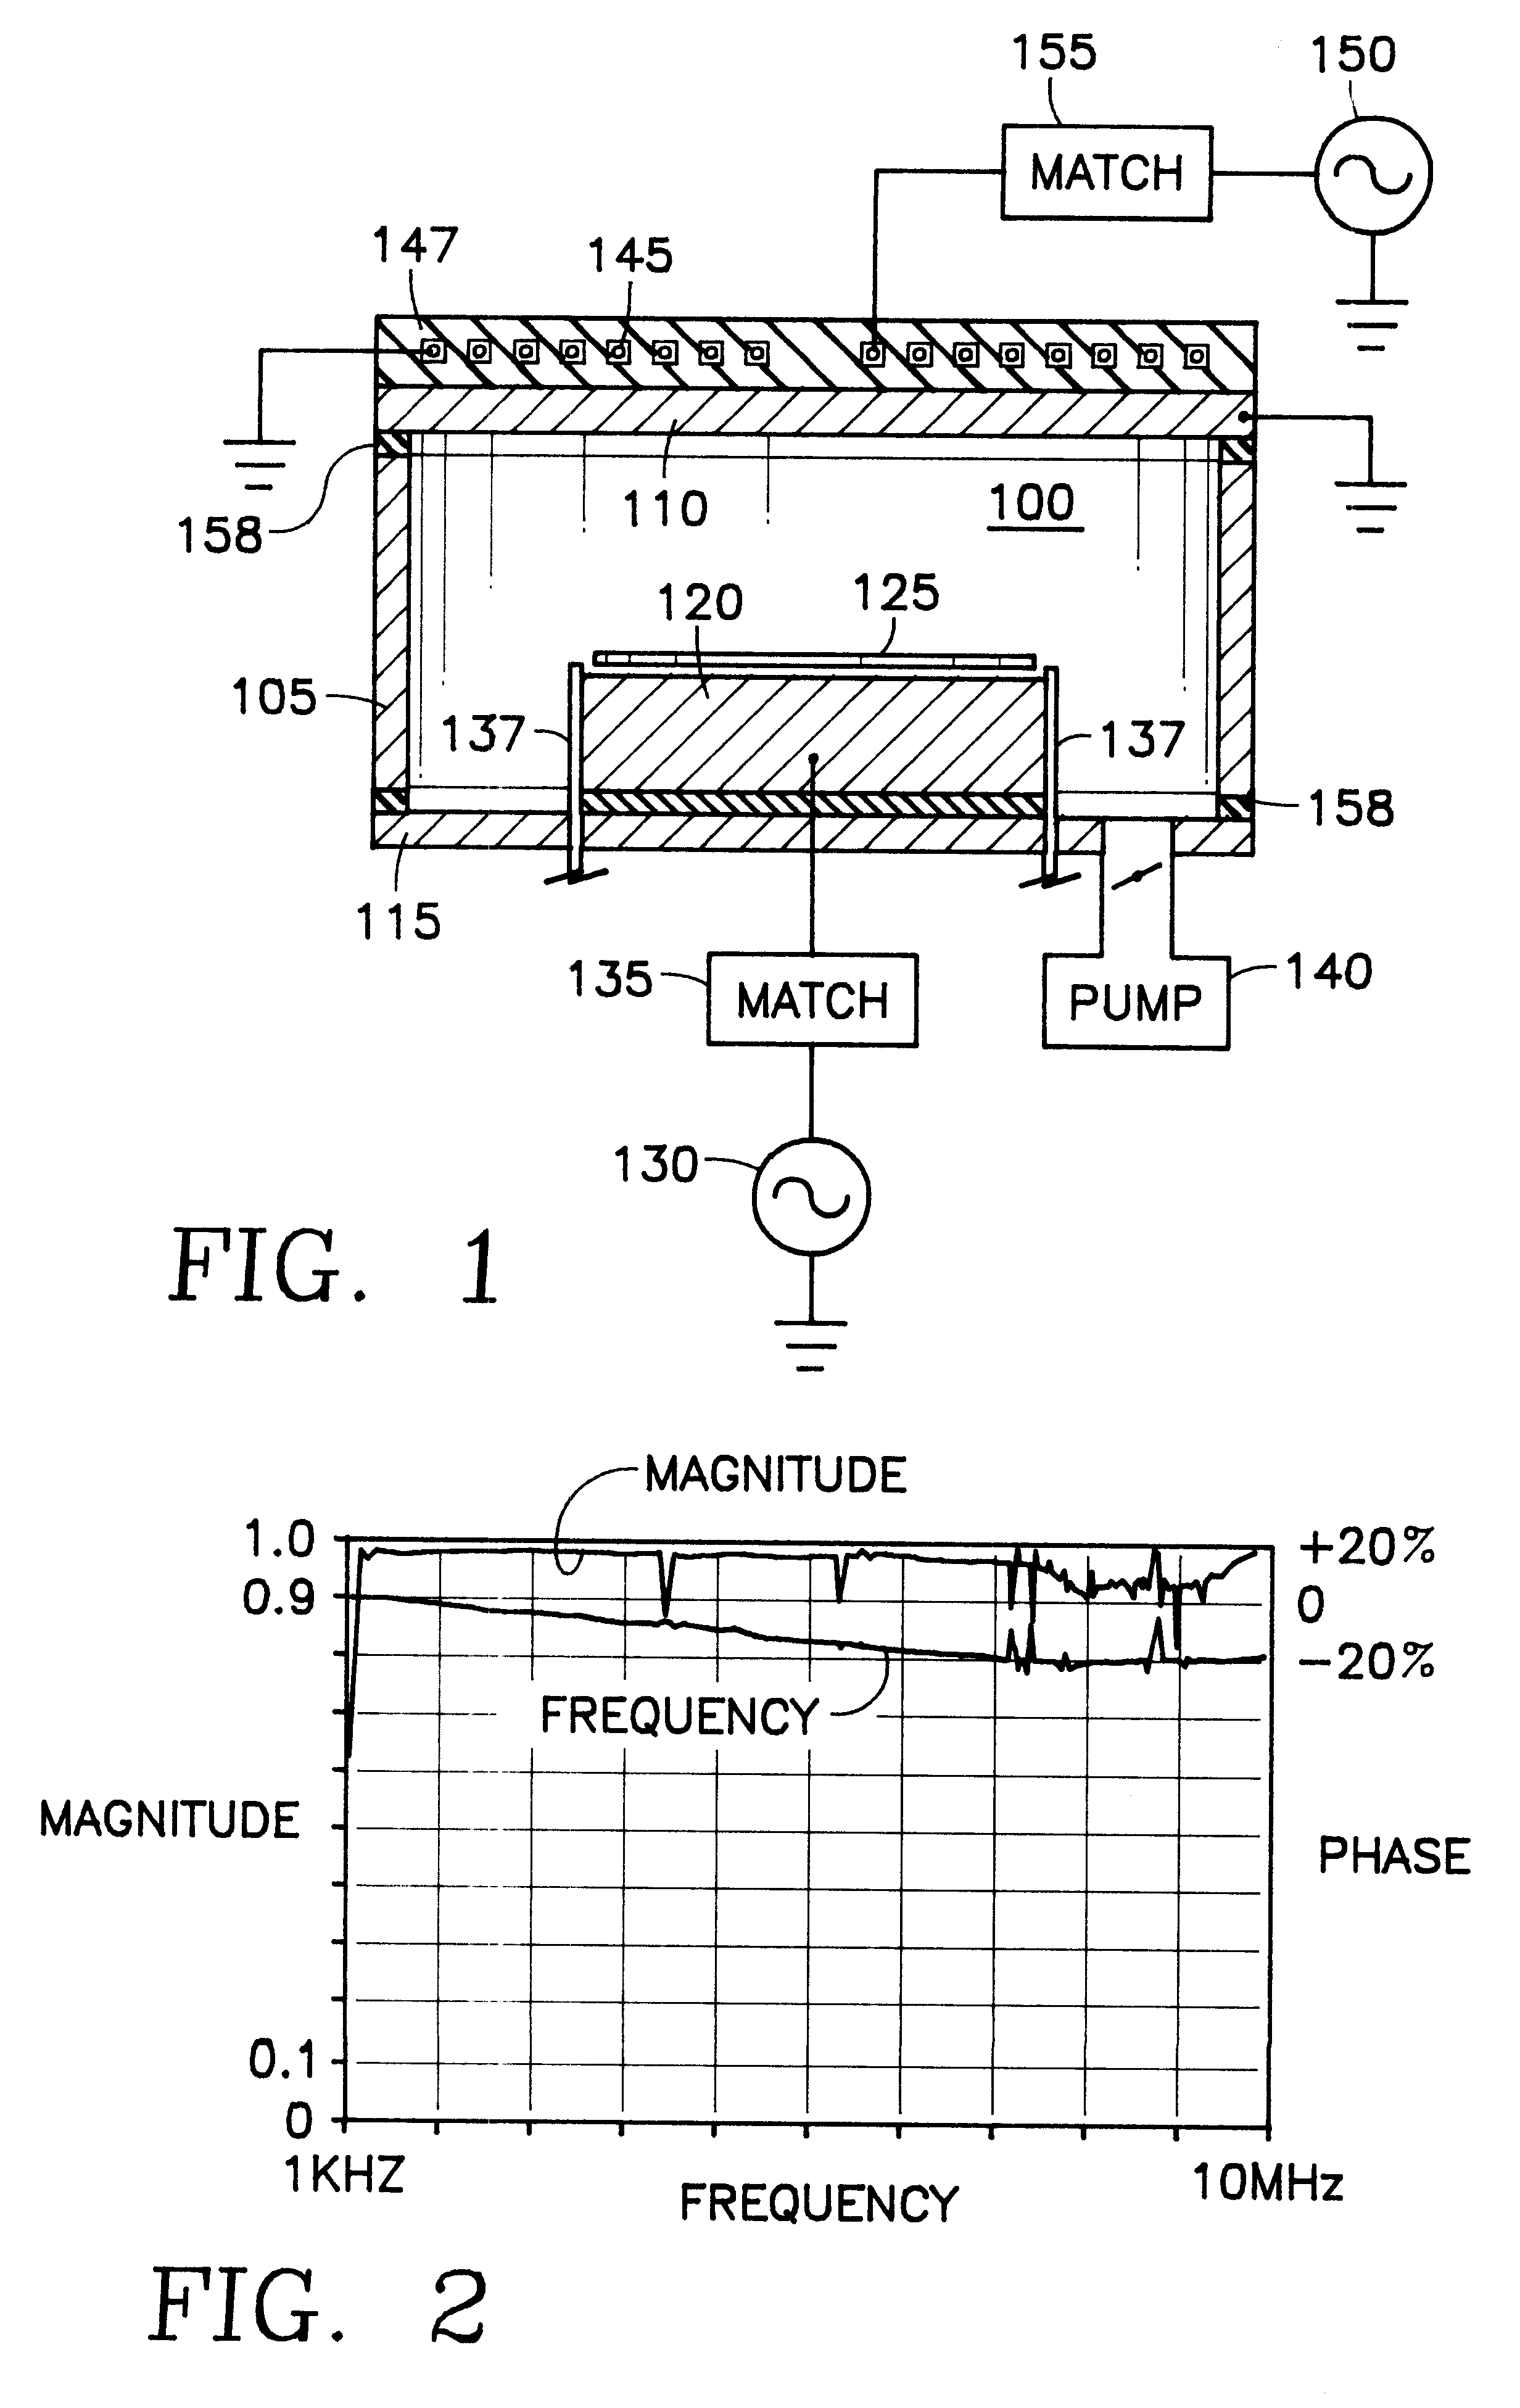 Parallel-plate electrode reactor having an inductive antenna coupling power through a parallel plate electrode